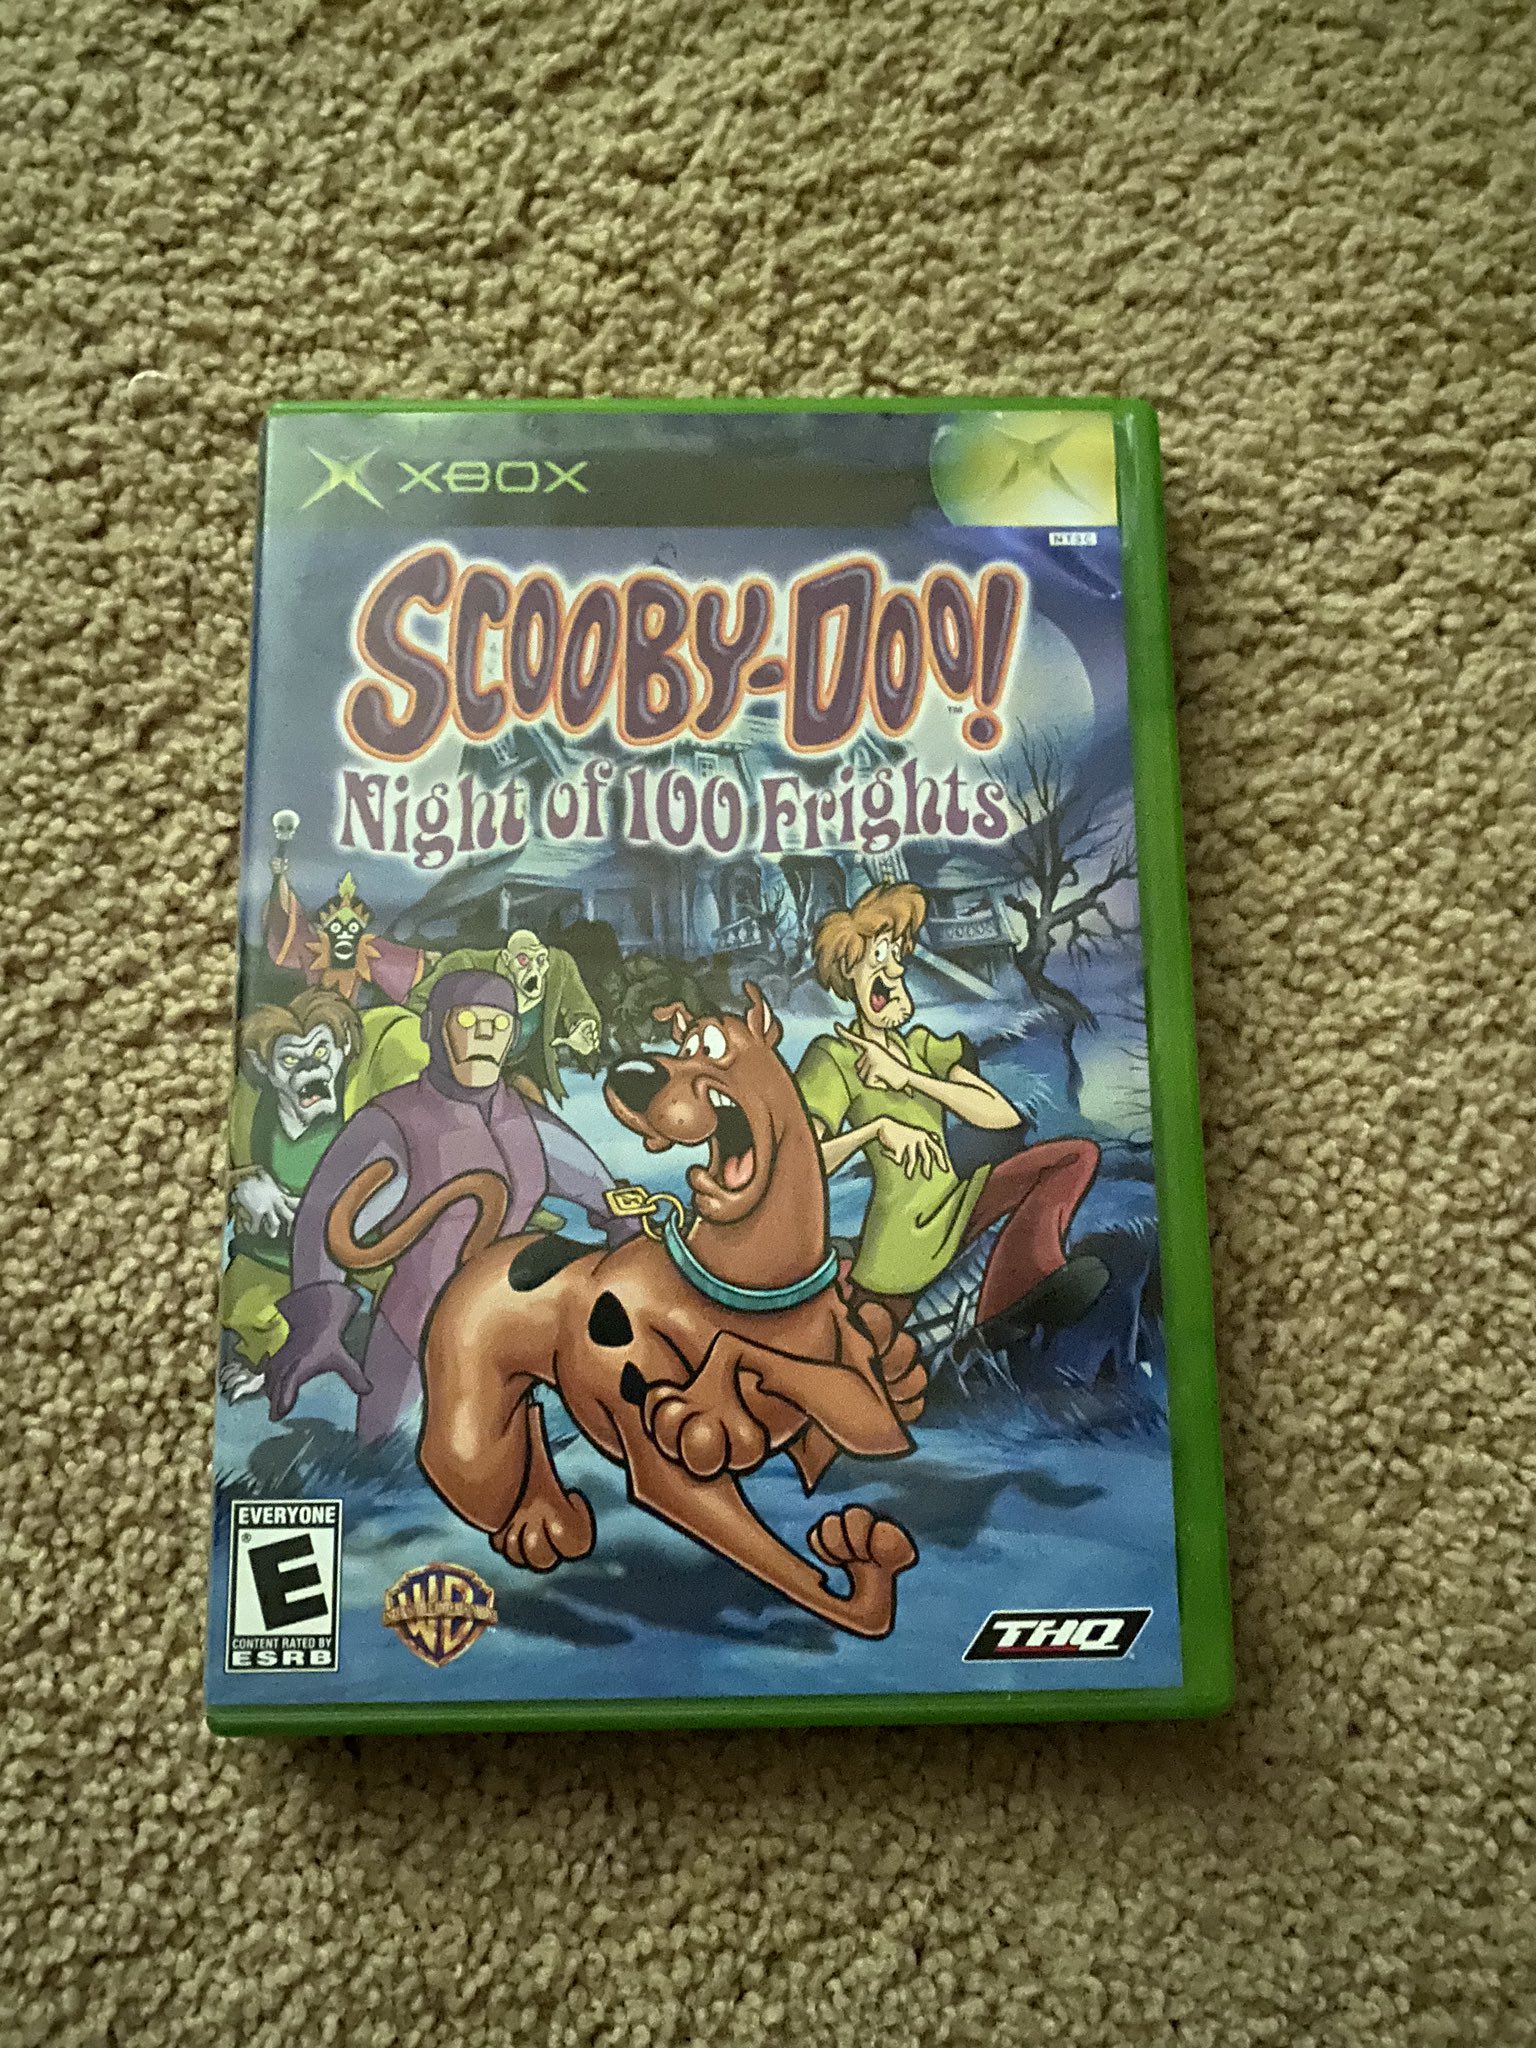 Scooby-Doo!: Night of 100 Frights Fanatic on Twitter: "It has come to my  attention that this game isn't playable on the Series X, please fix this  problem @Xbox #Xbox @Microsoft @XboxP3 https://t.co/AJoPRPBGFB" /